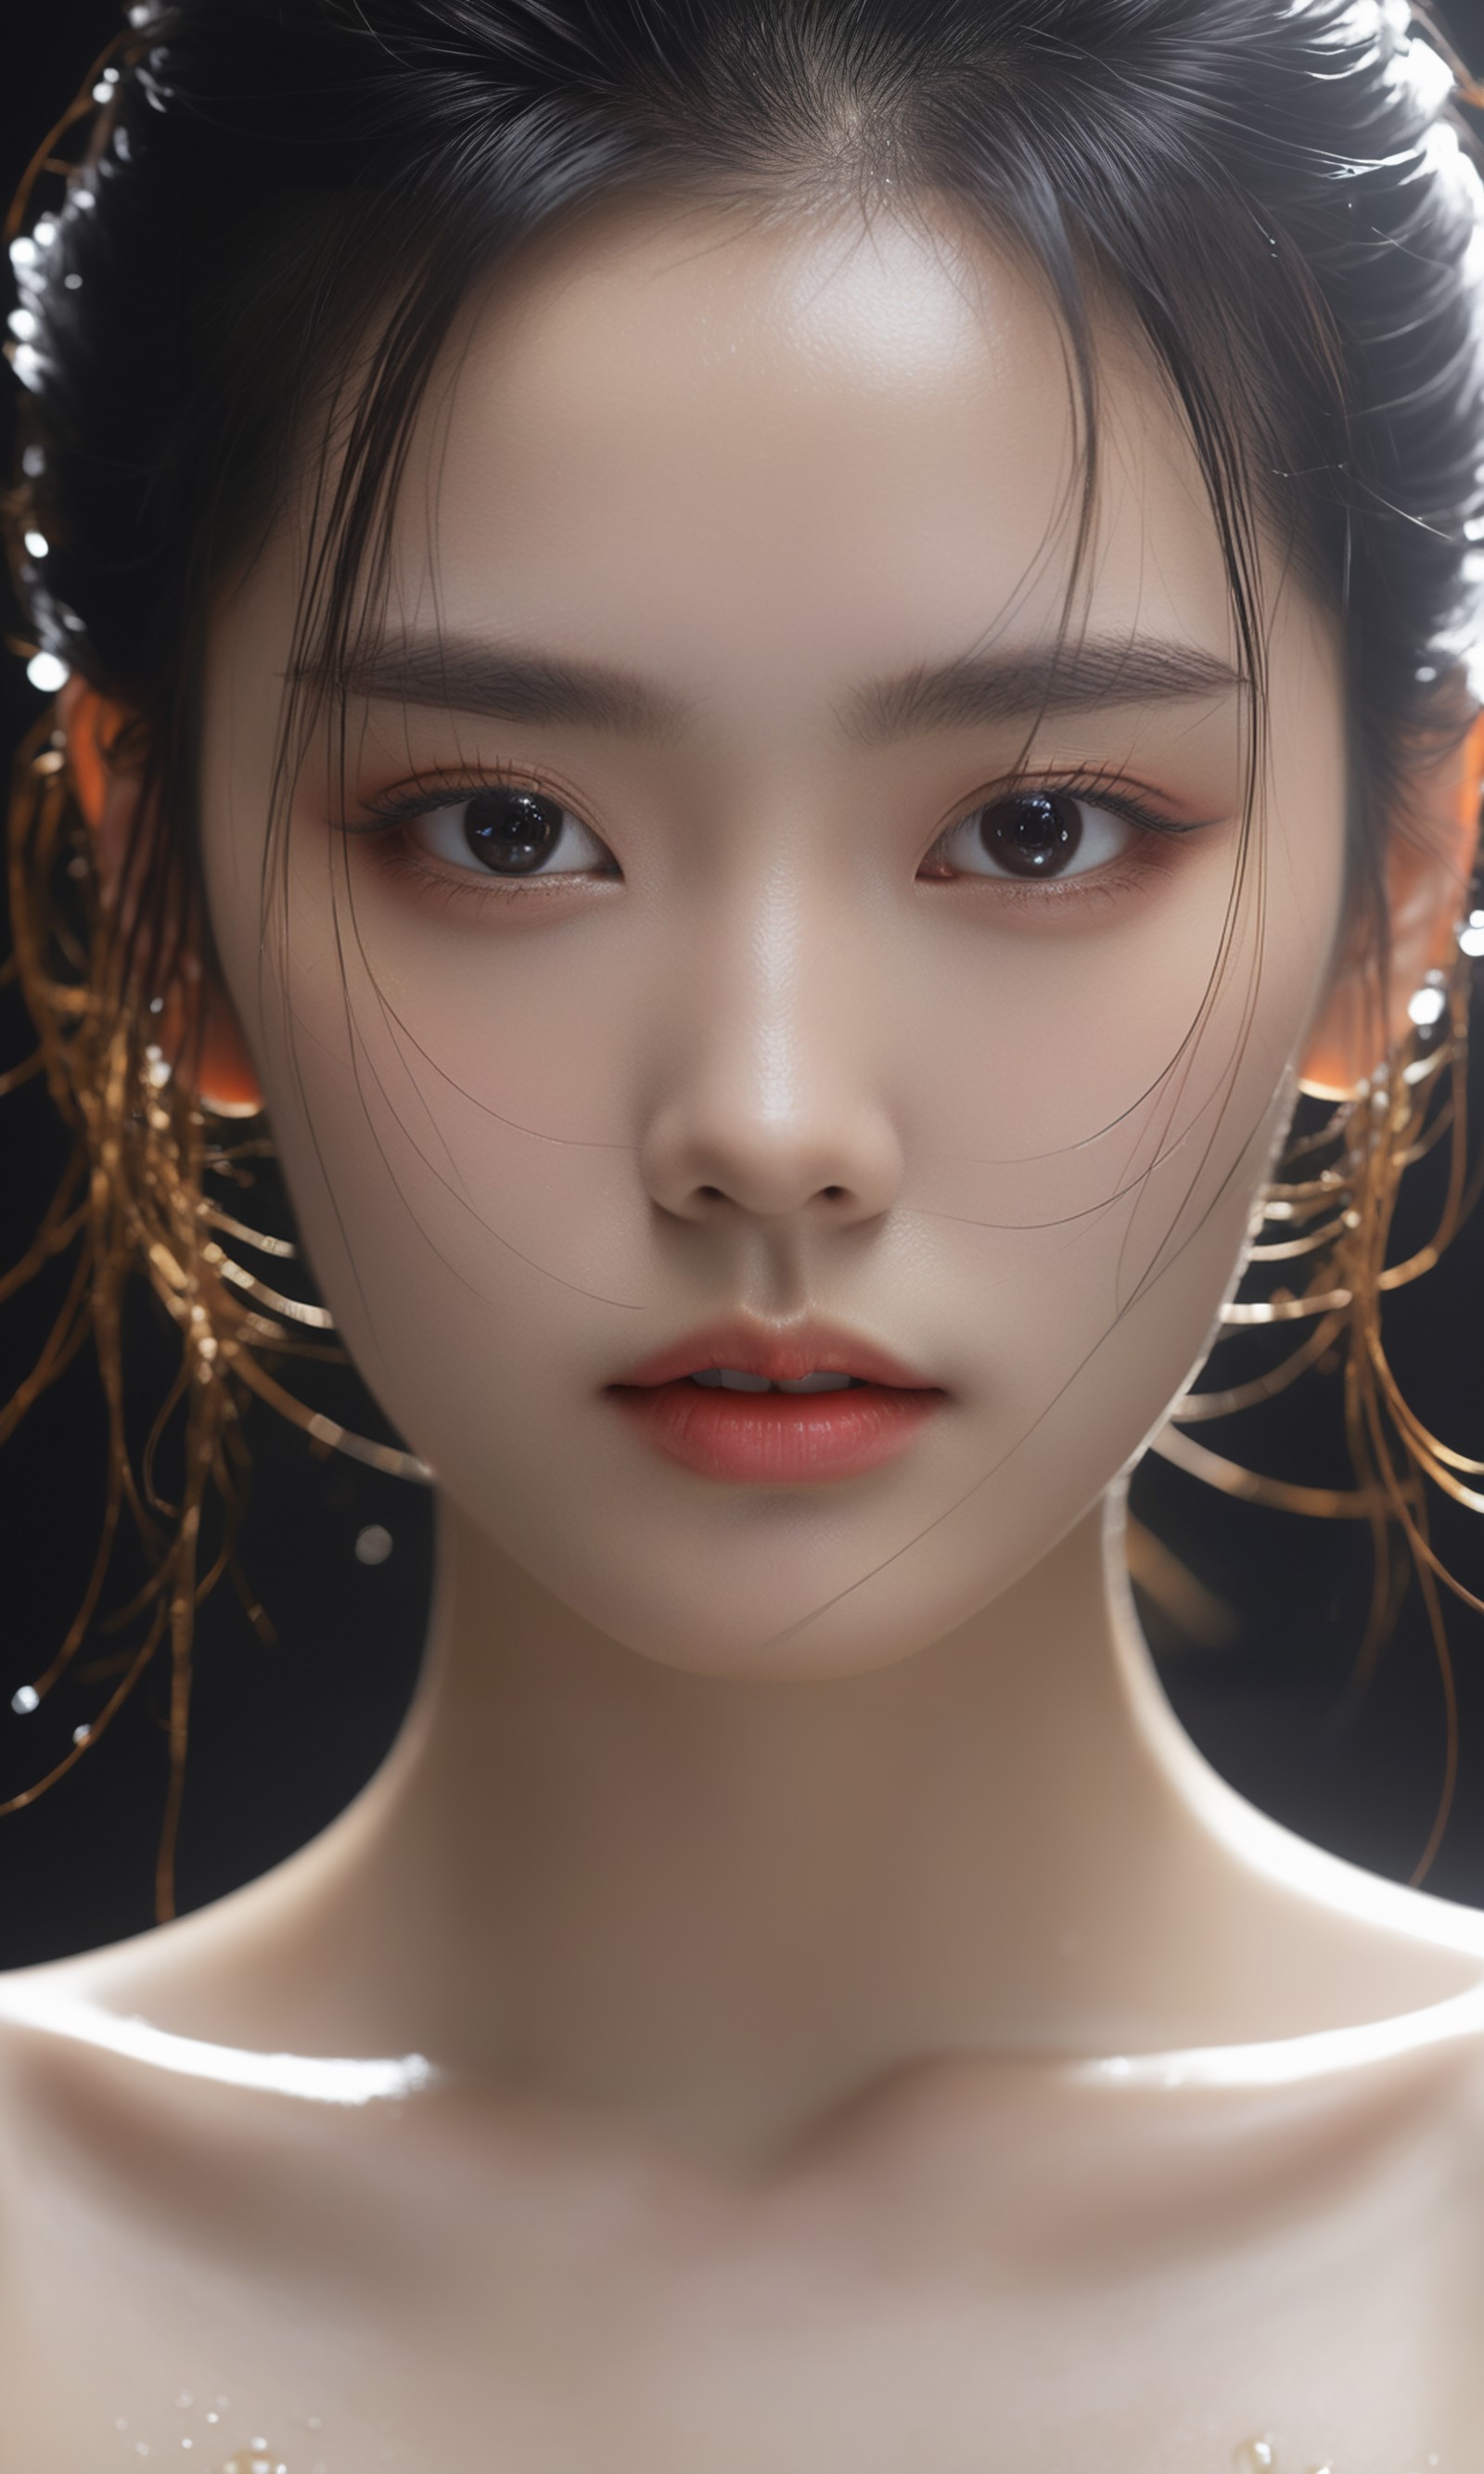 Realistic,Masterpiece,18 - year - old beautiful girl and monster,pearl - like eyes,extremely delicate facial depiction,hea...